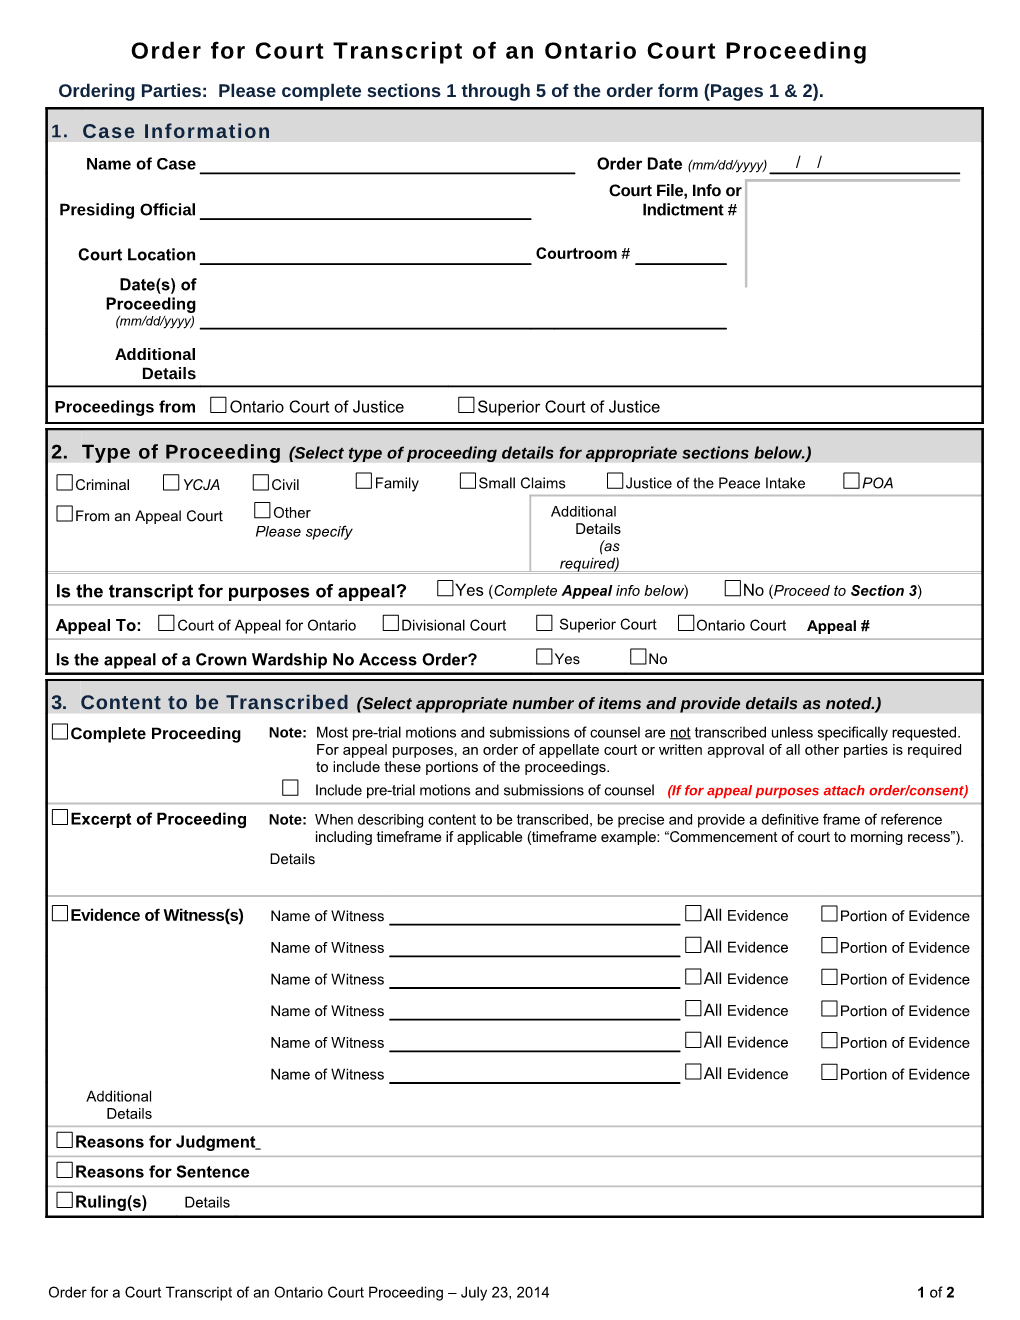 Appendix B - Request Form/Undertaking to the Court for Access to Digital Court Recordings